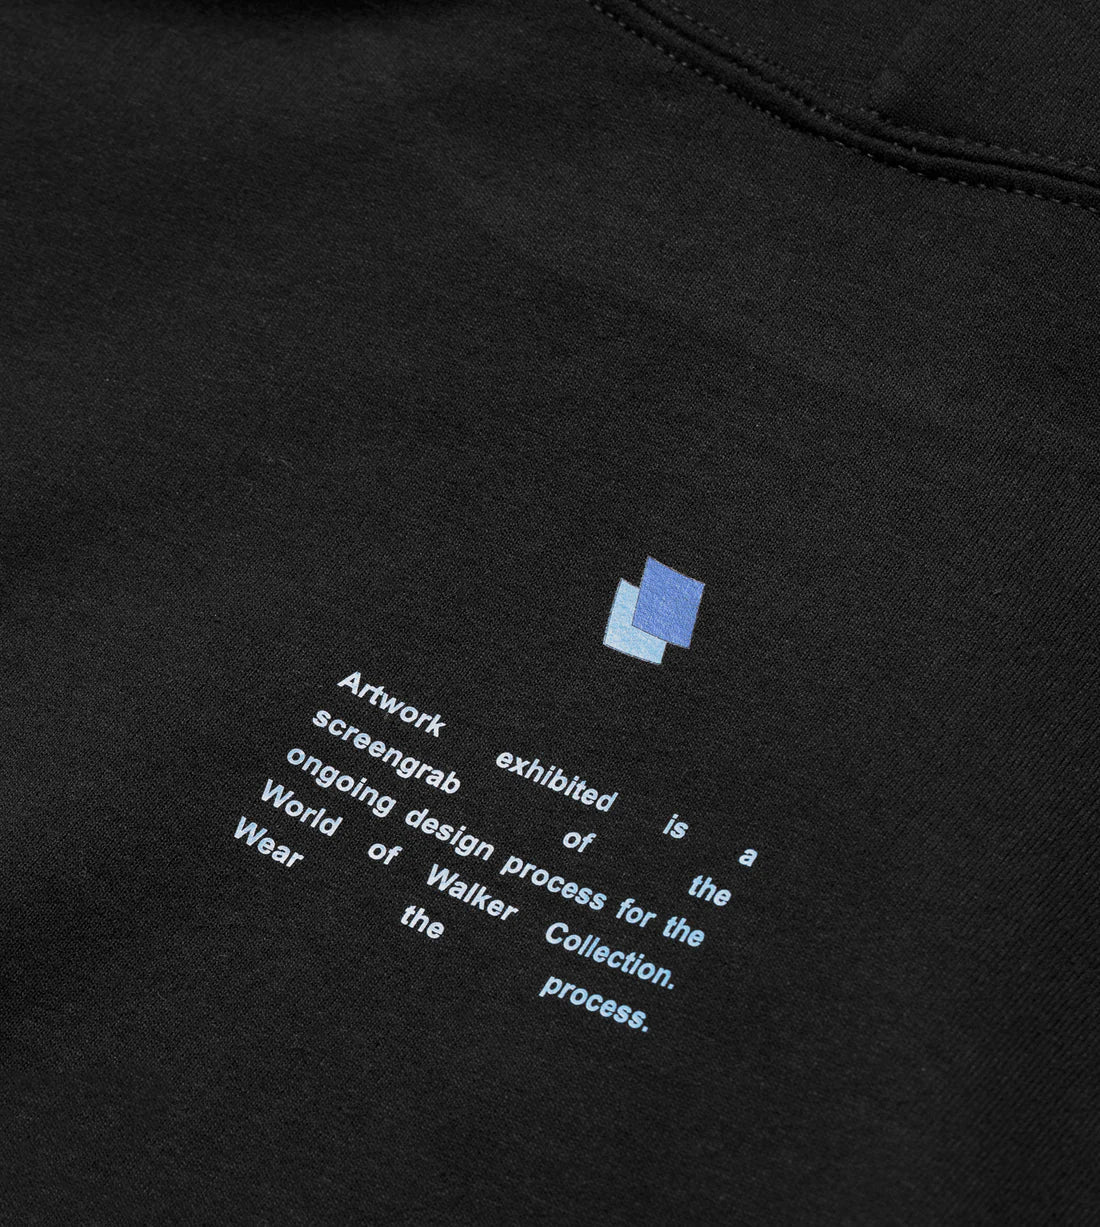 Close-up of the Alan Walker Blueprint Hoodie with printed statement about the design process on the World of Walker Wear Collection, accompanied by a small blue logo patch.